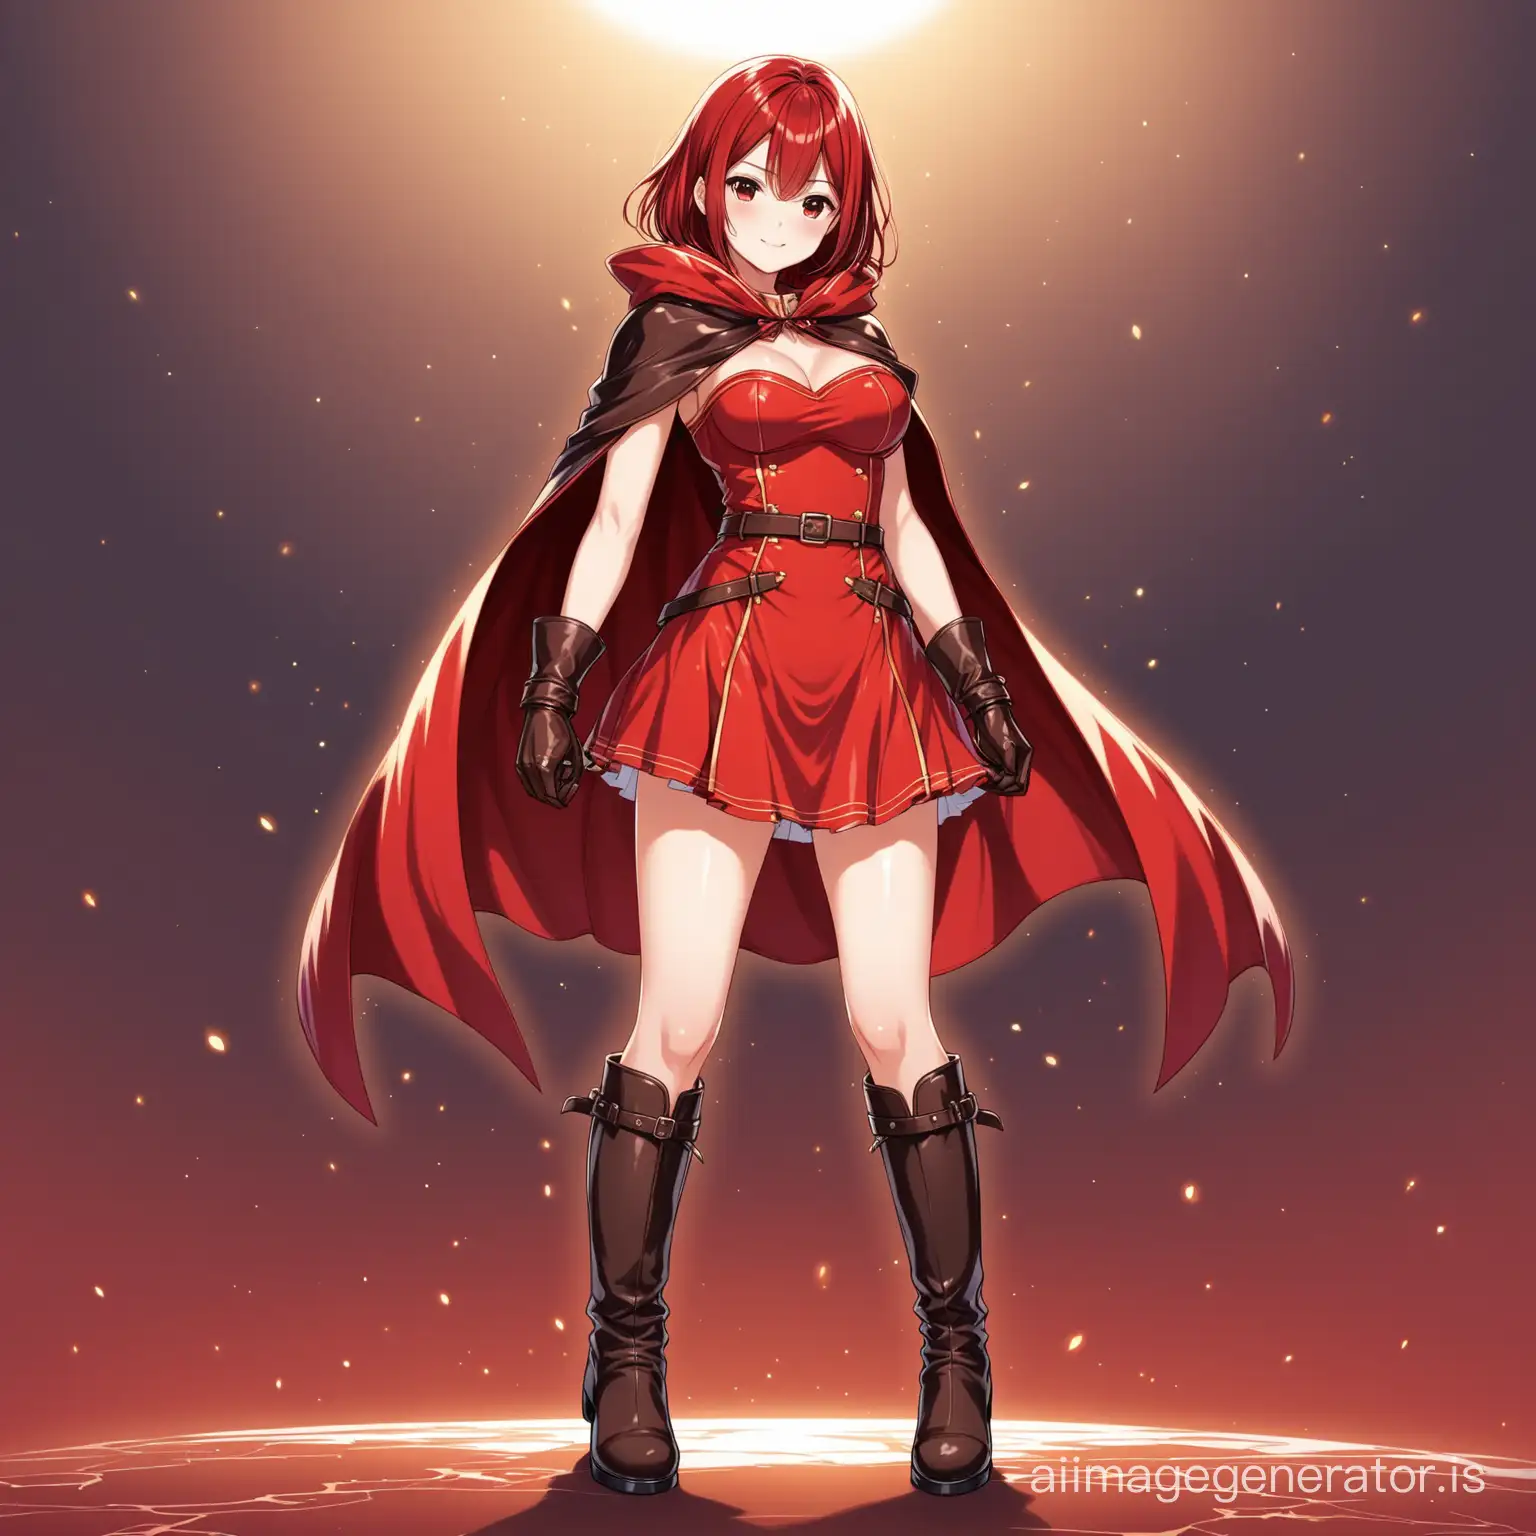 Seductive-Anime-Girl-in-Red-Dress-with-Cape-Leather-Boots-and-Gloves